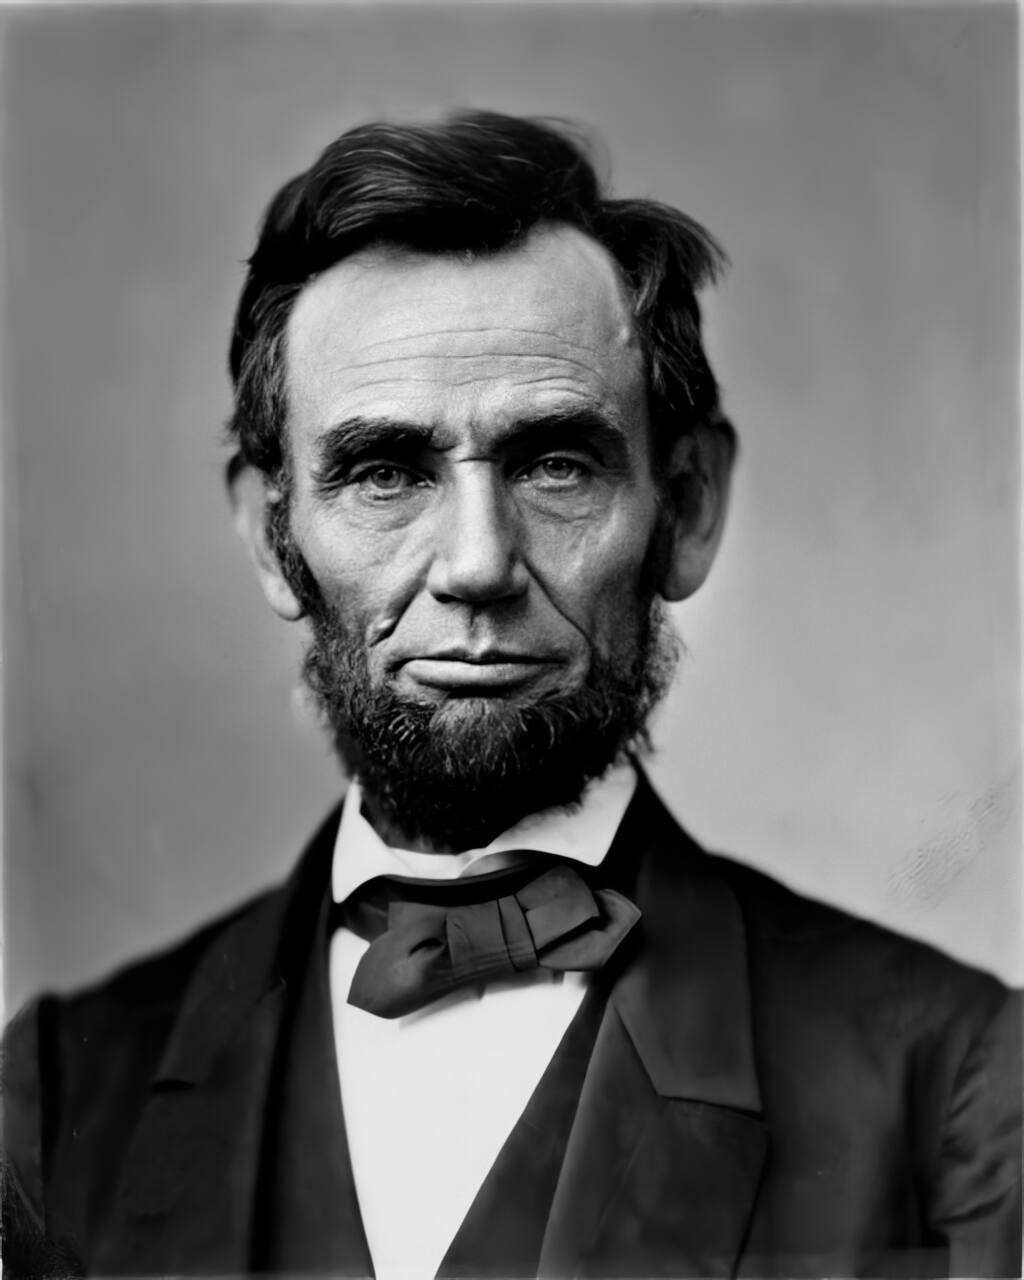 ABRAHAM LINCOLN: His death inflamed antagonism between pro-Lincoln, anti-slavery Petalumans and pro-confederacy, anti-Lincoln Santa Rosa.